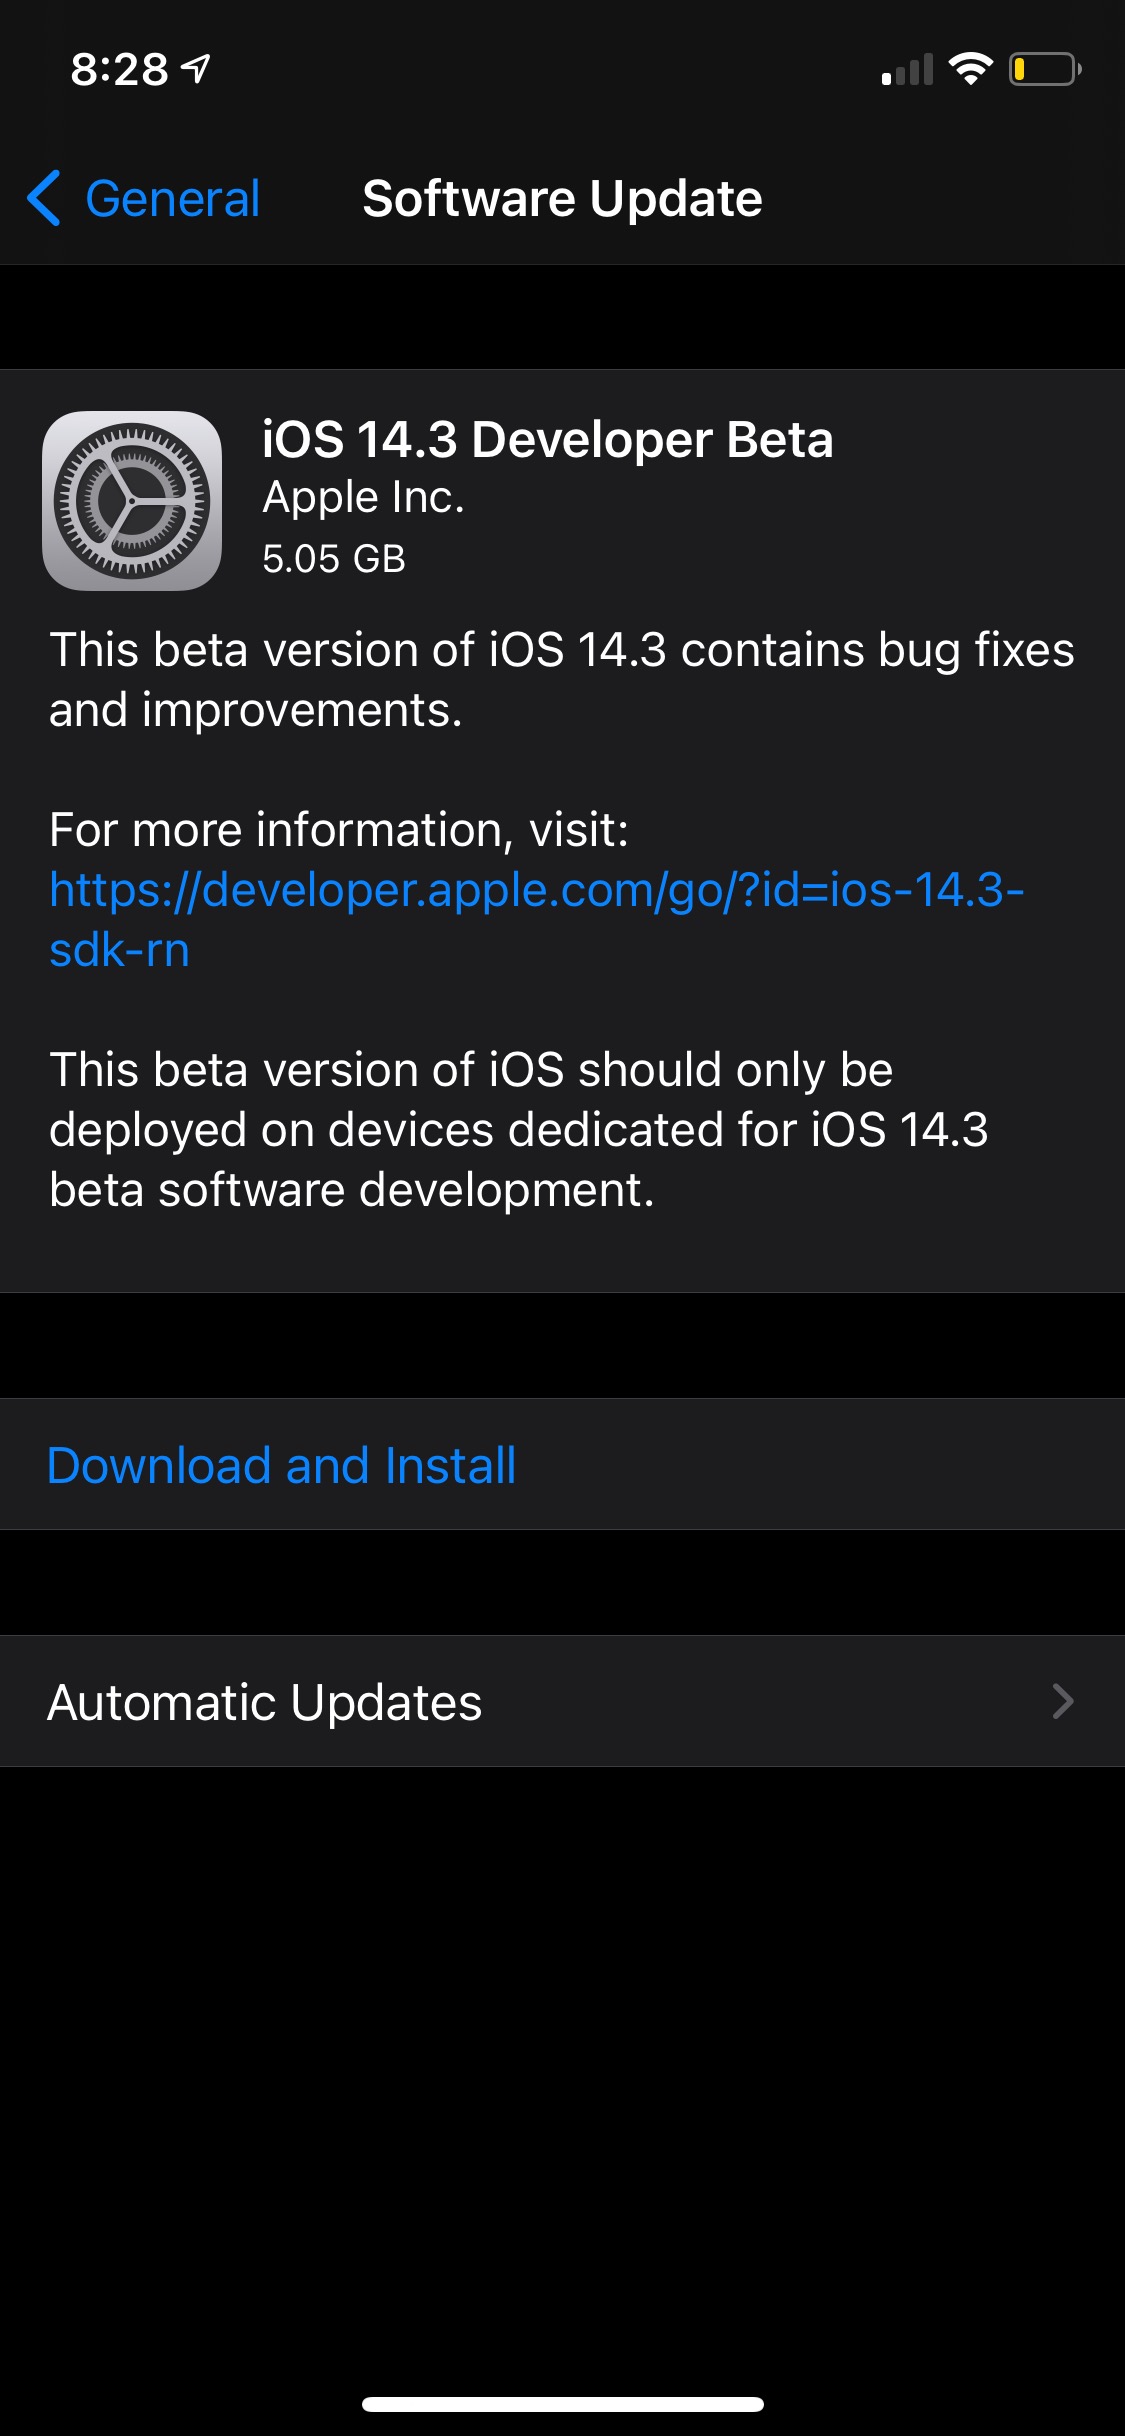 Apple Releases iOS 14.3 Beta and iPadOS 14.3 Beta [Download]